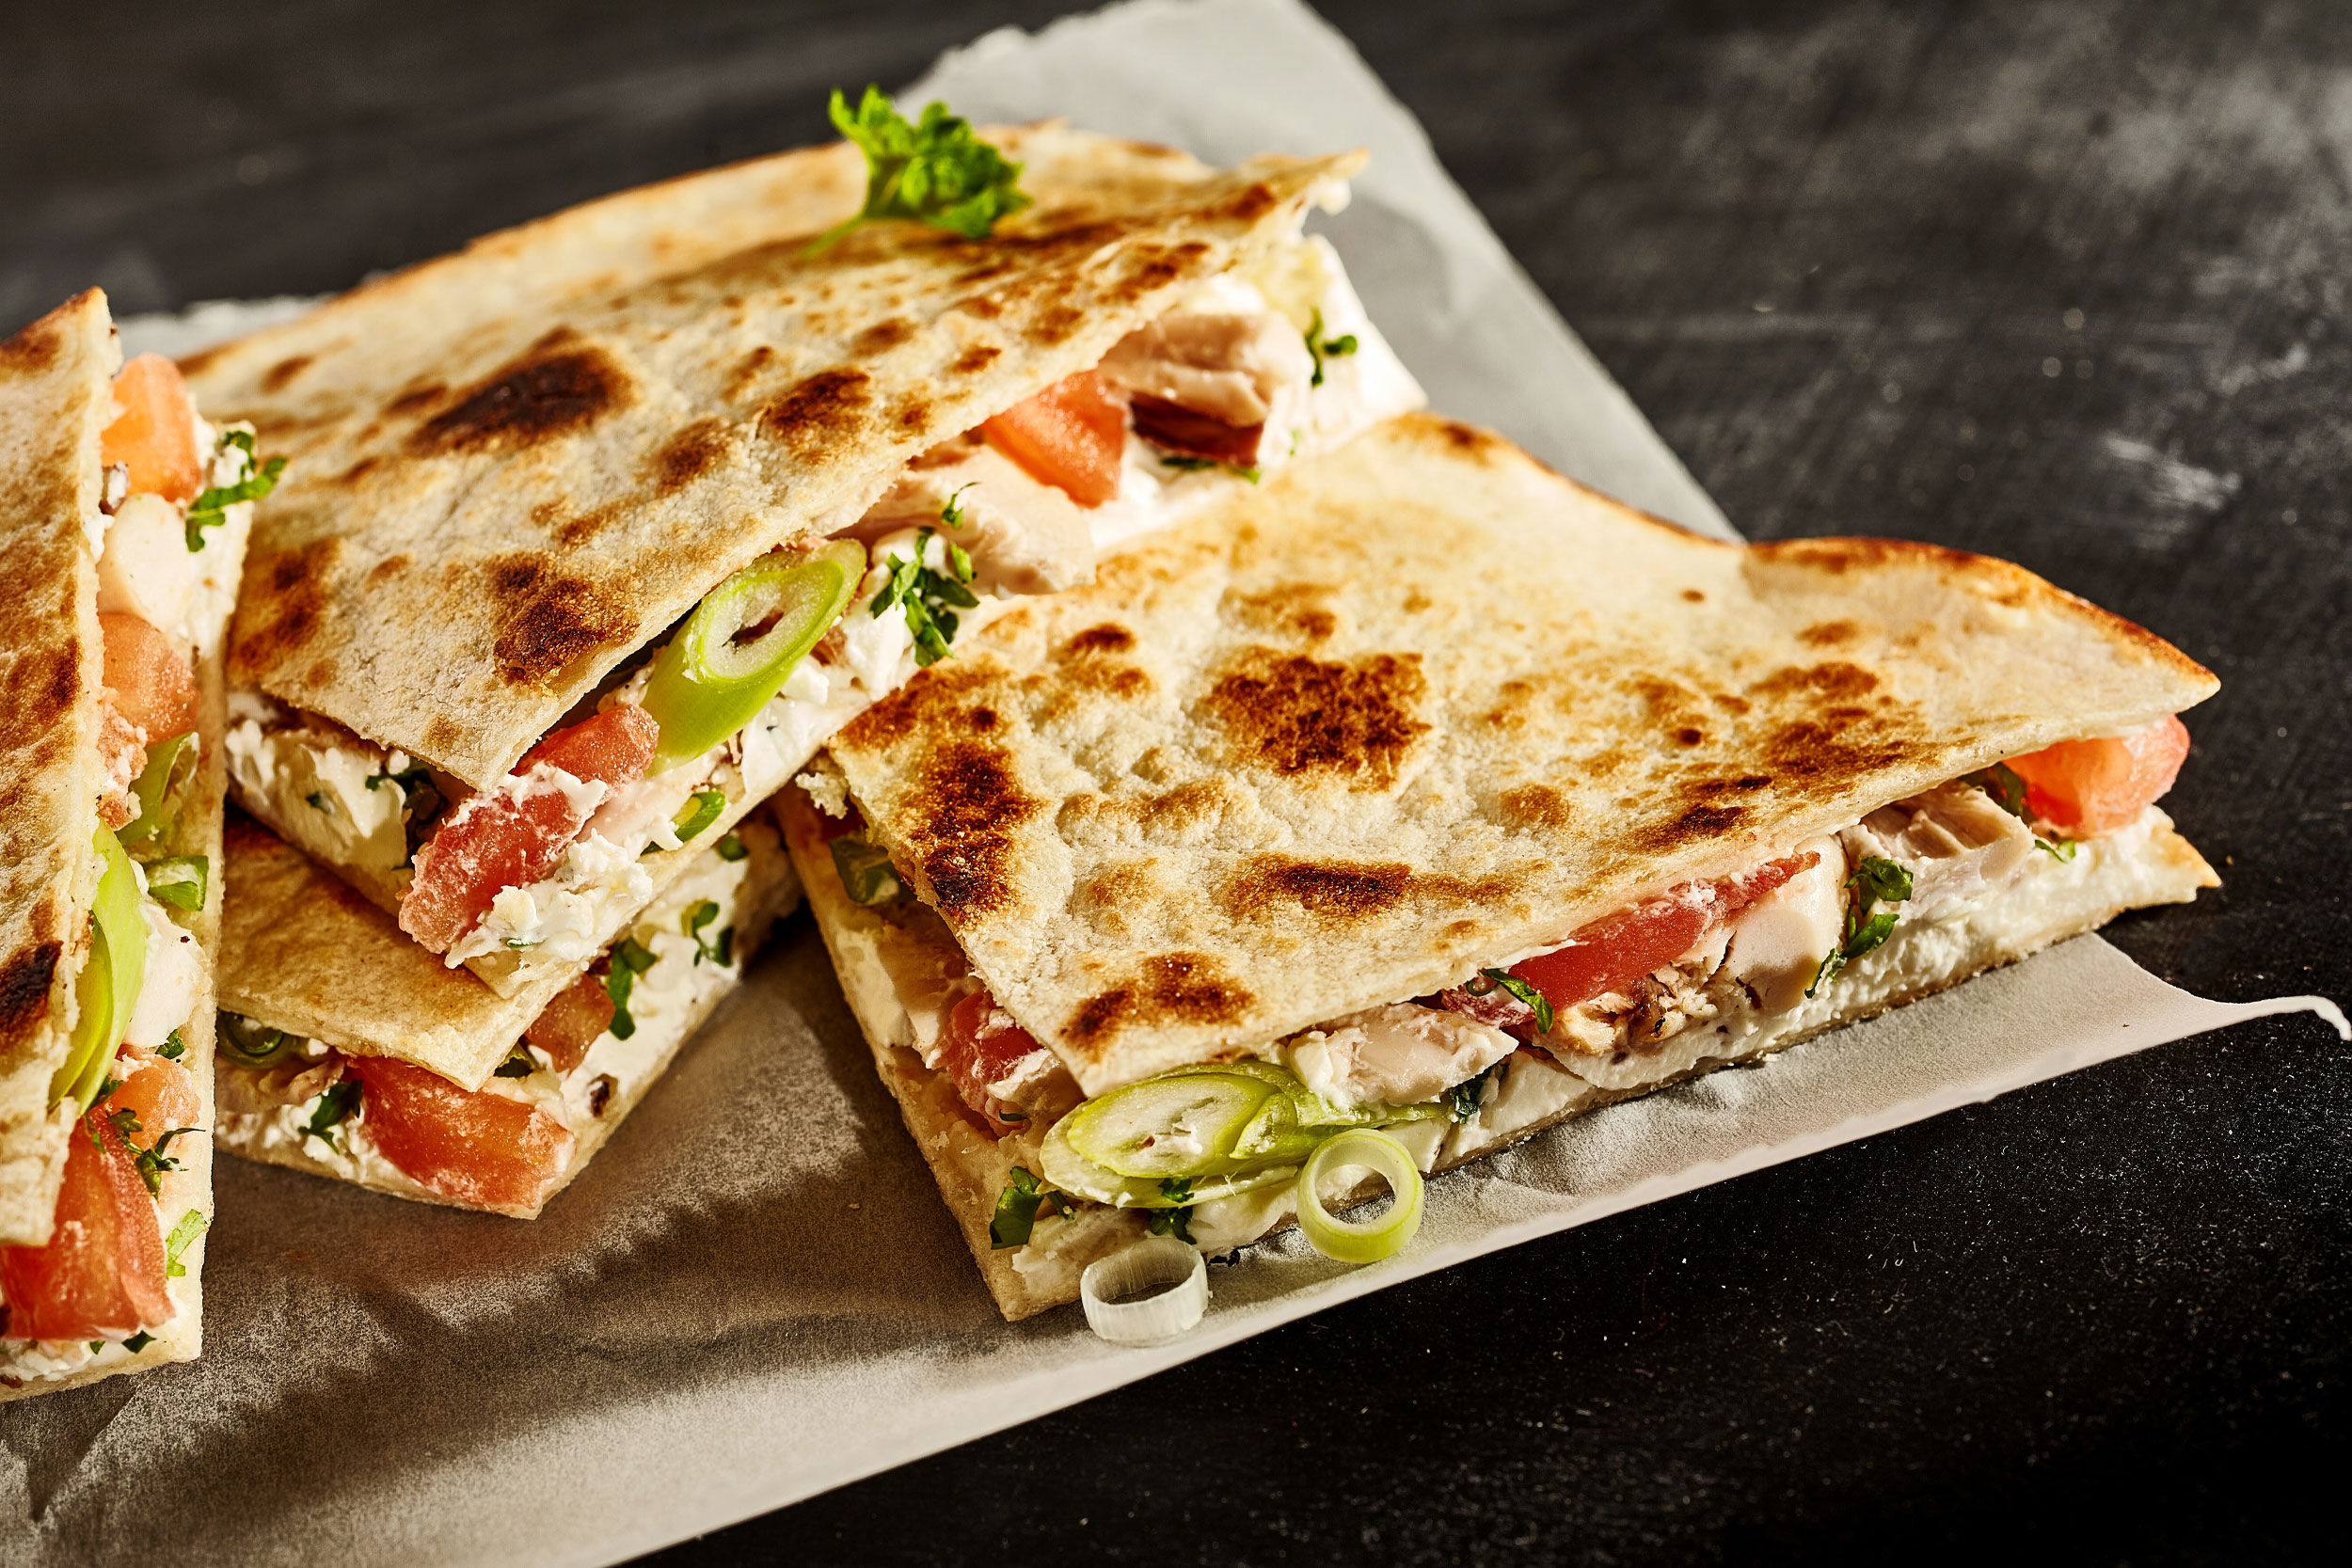 Apple and Cheddar Cheese Quesadilla